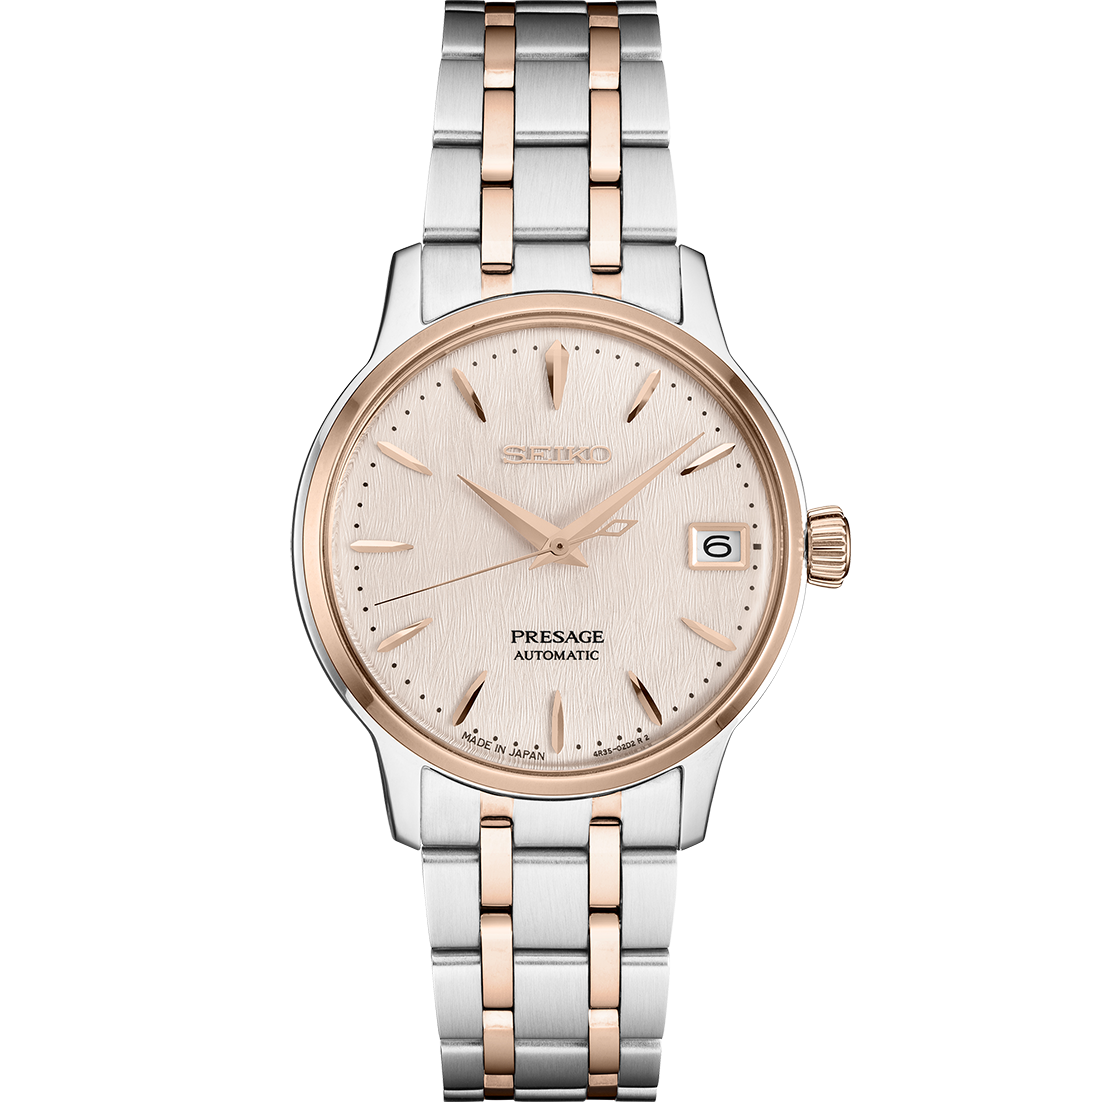 Seiko-Presage-SRPF54-34mm-Peach-Dial-Rose-Gold-Two-Tone-Automatic-Womens-Watch-133908587335